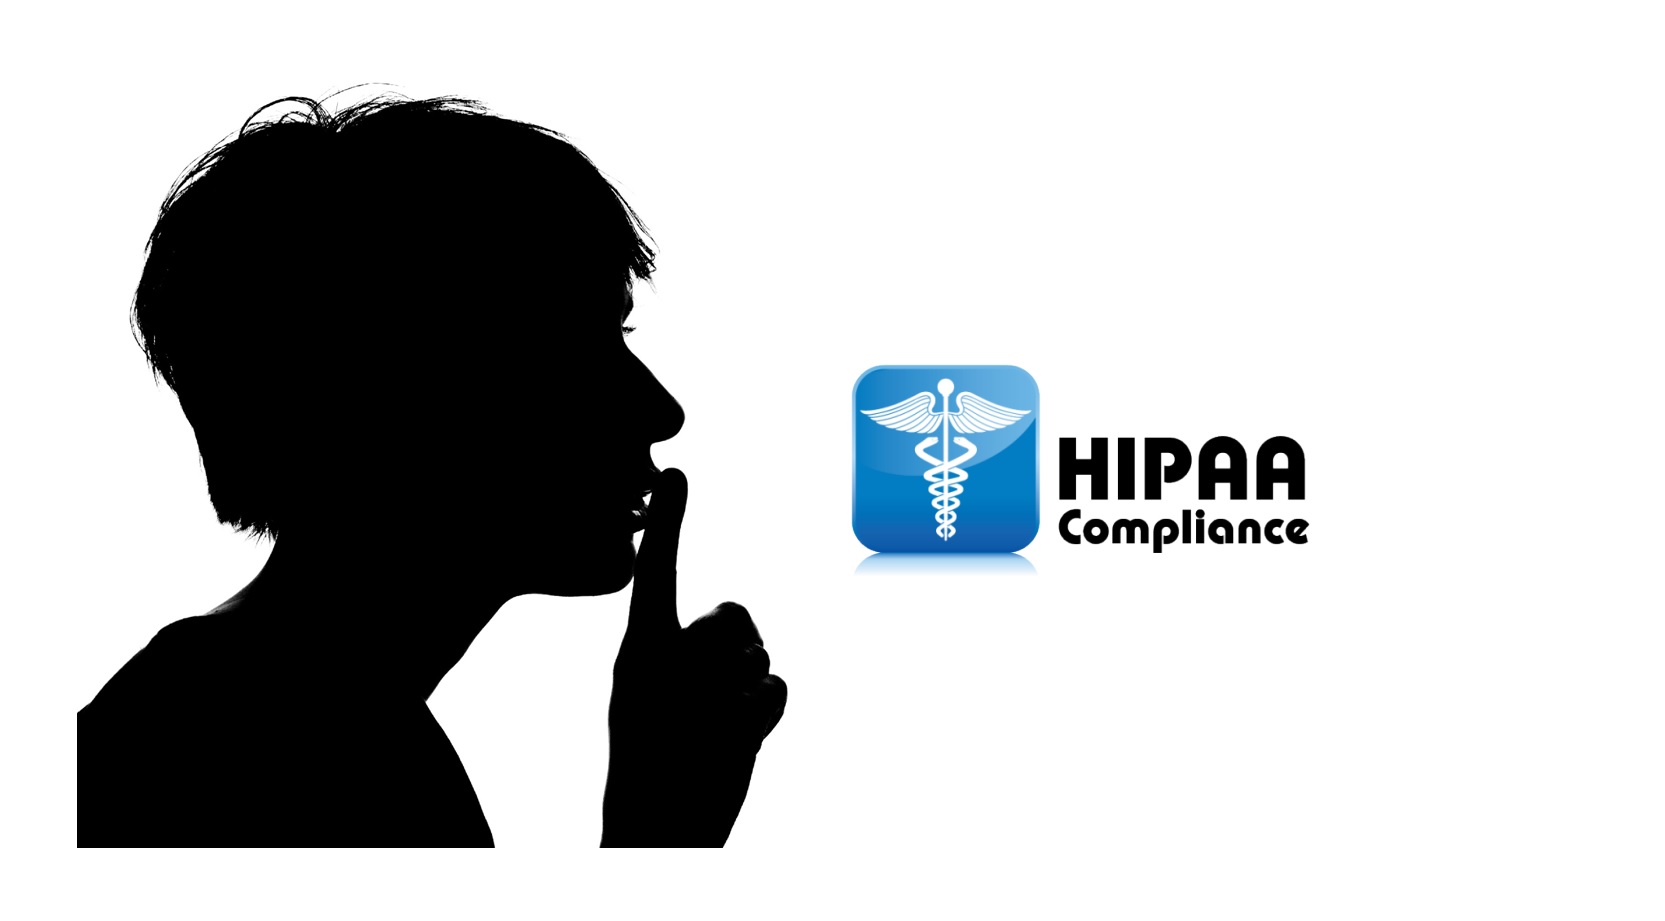 If you are a therapist, practice owner, physician, or professional who falls under HIPAA you MUST read this!